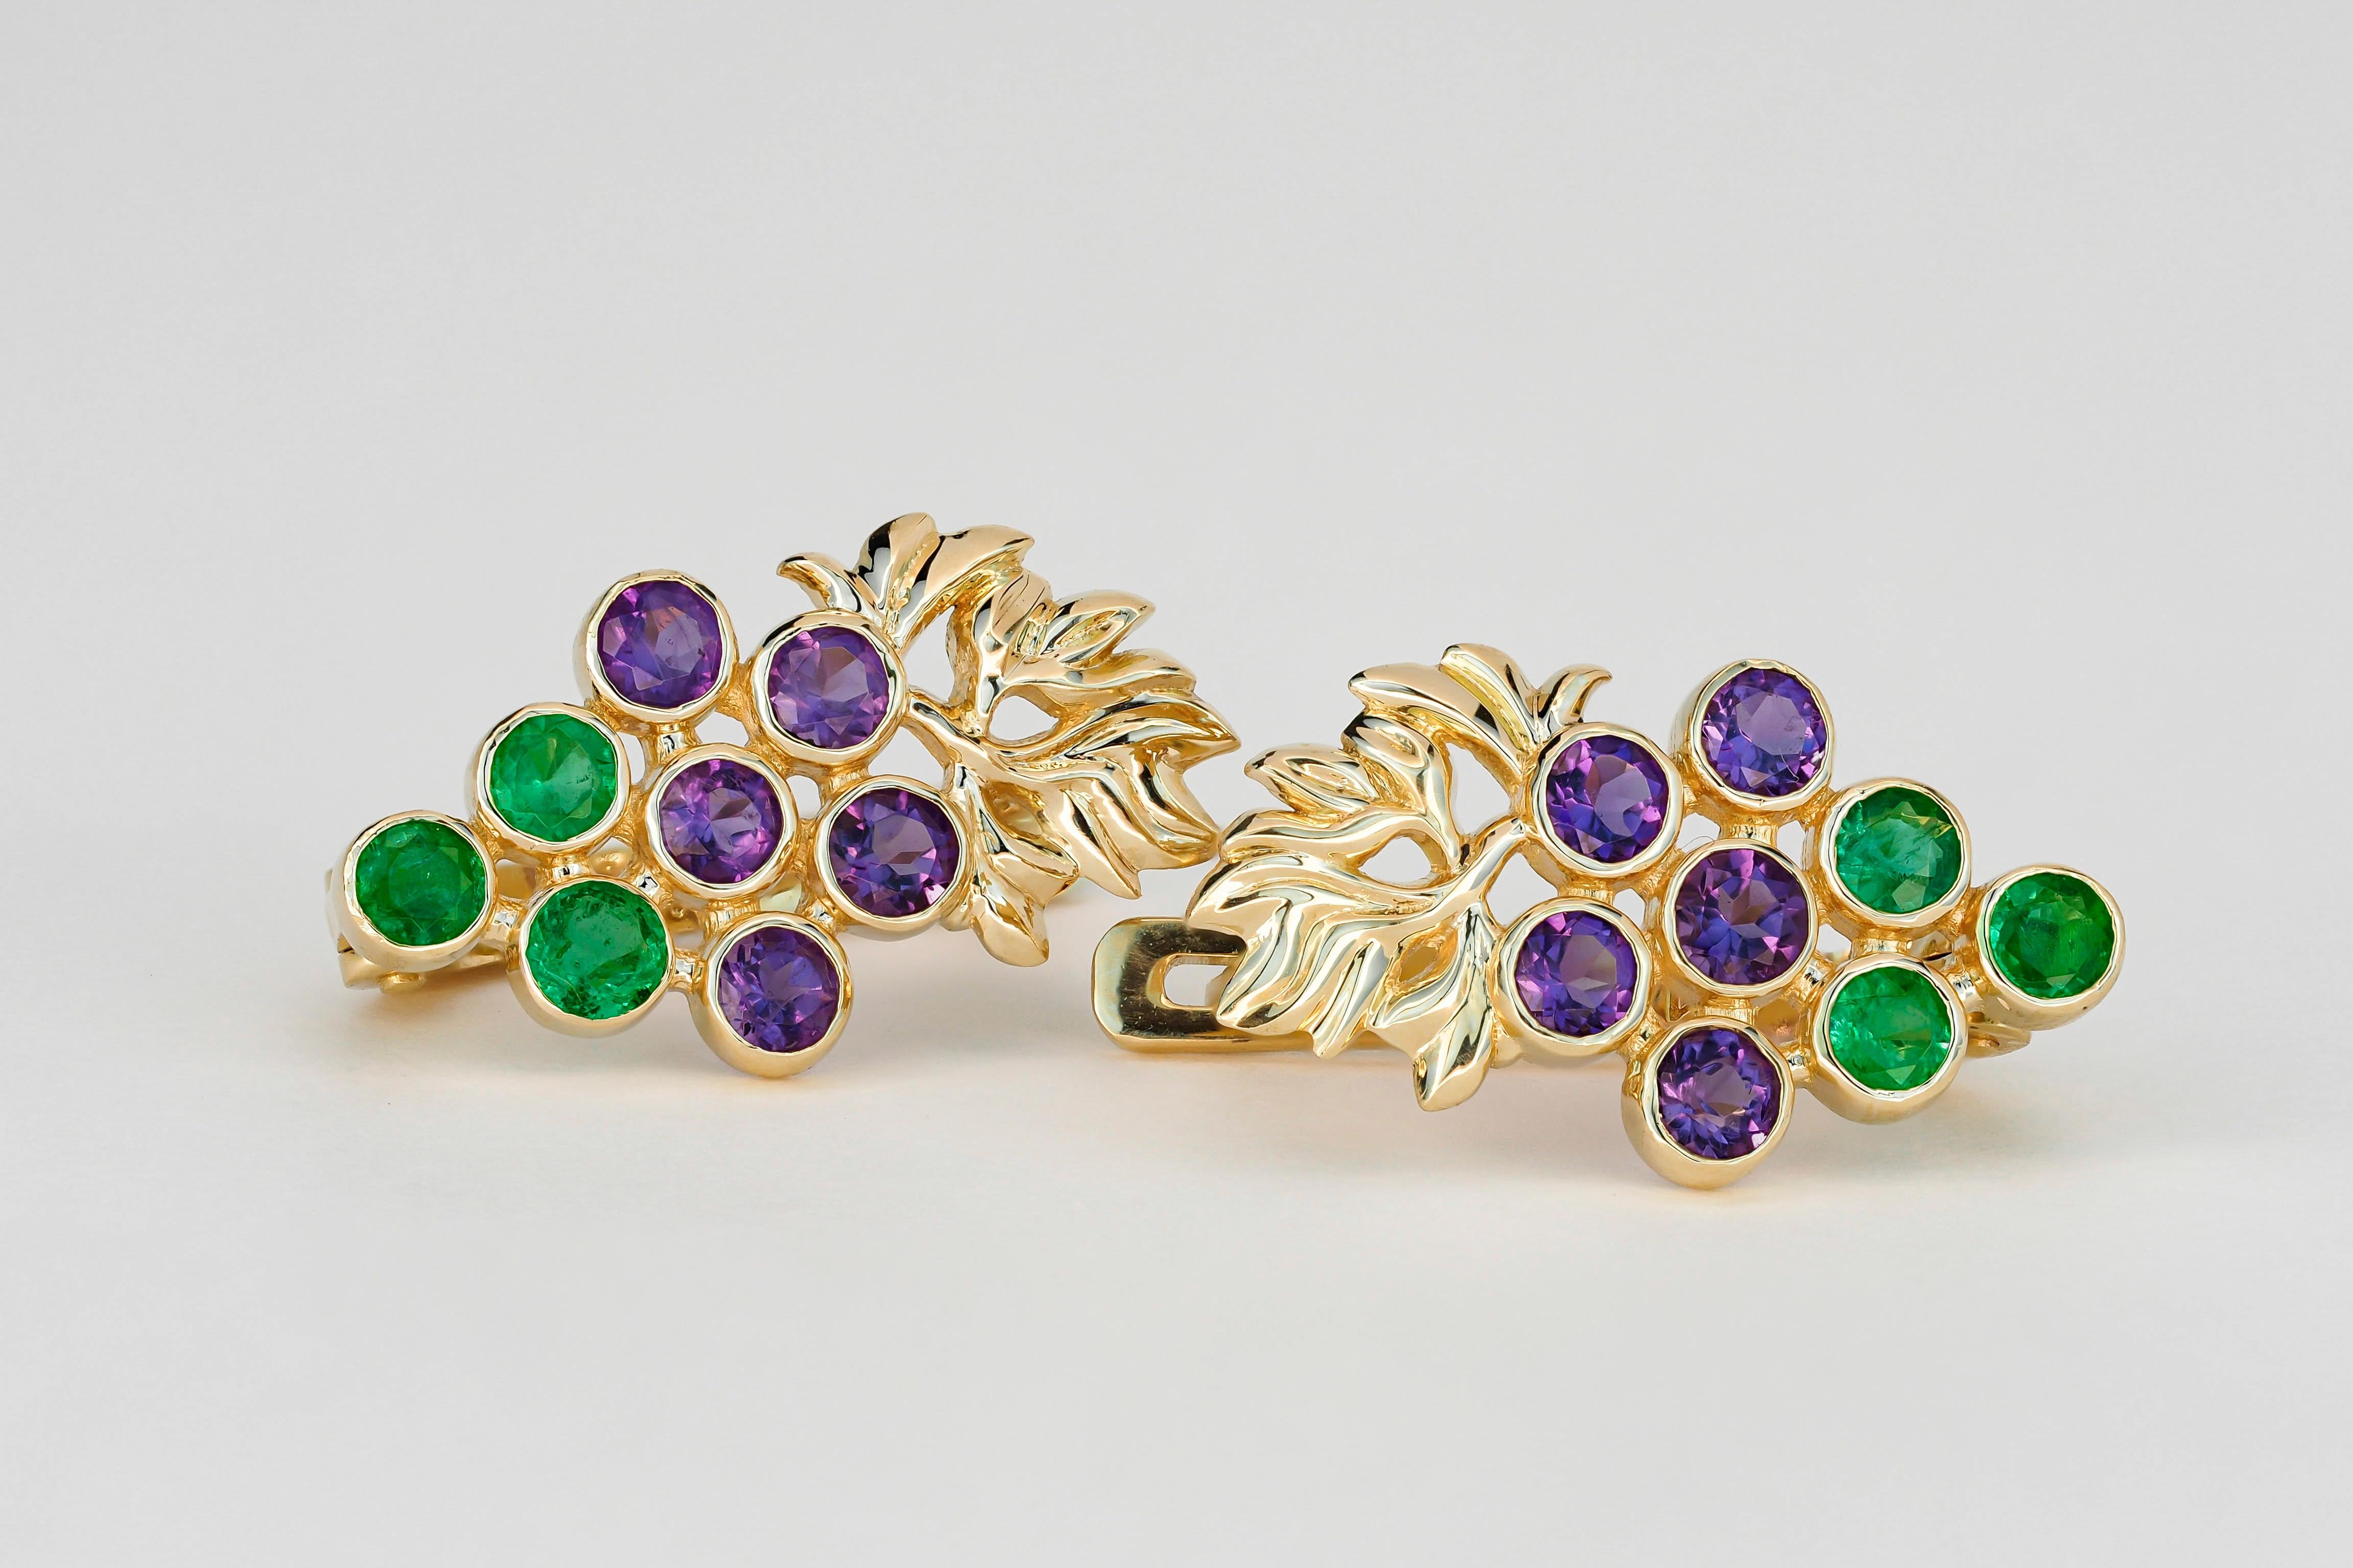 Modern Grape Earrings with emeralds and amethysts in 14k gold.  For Sale